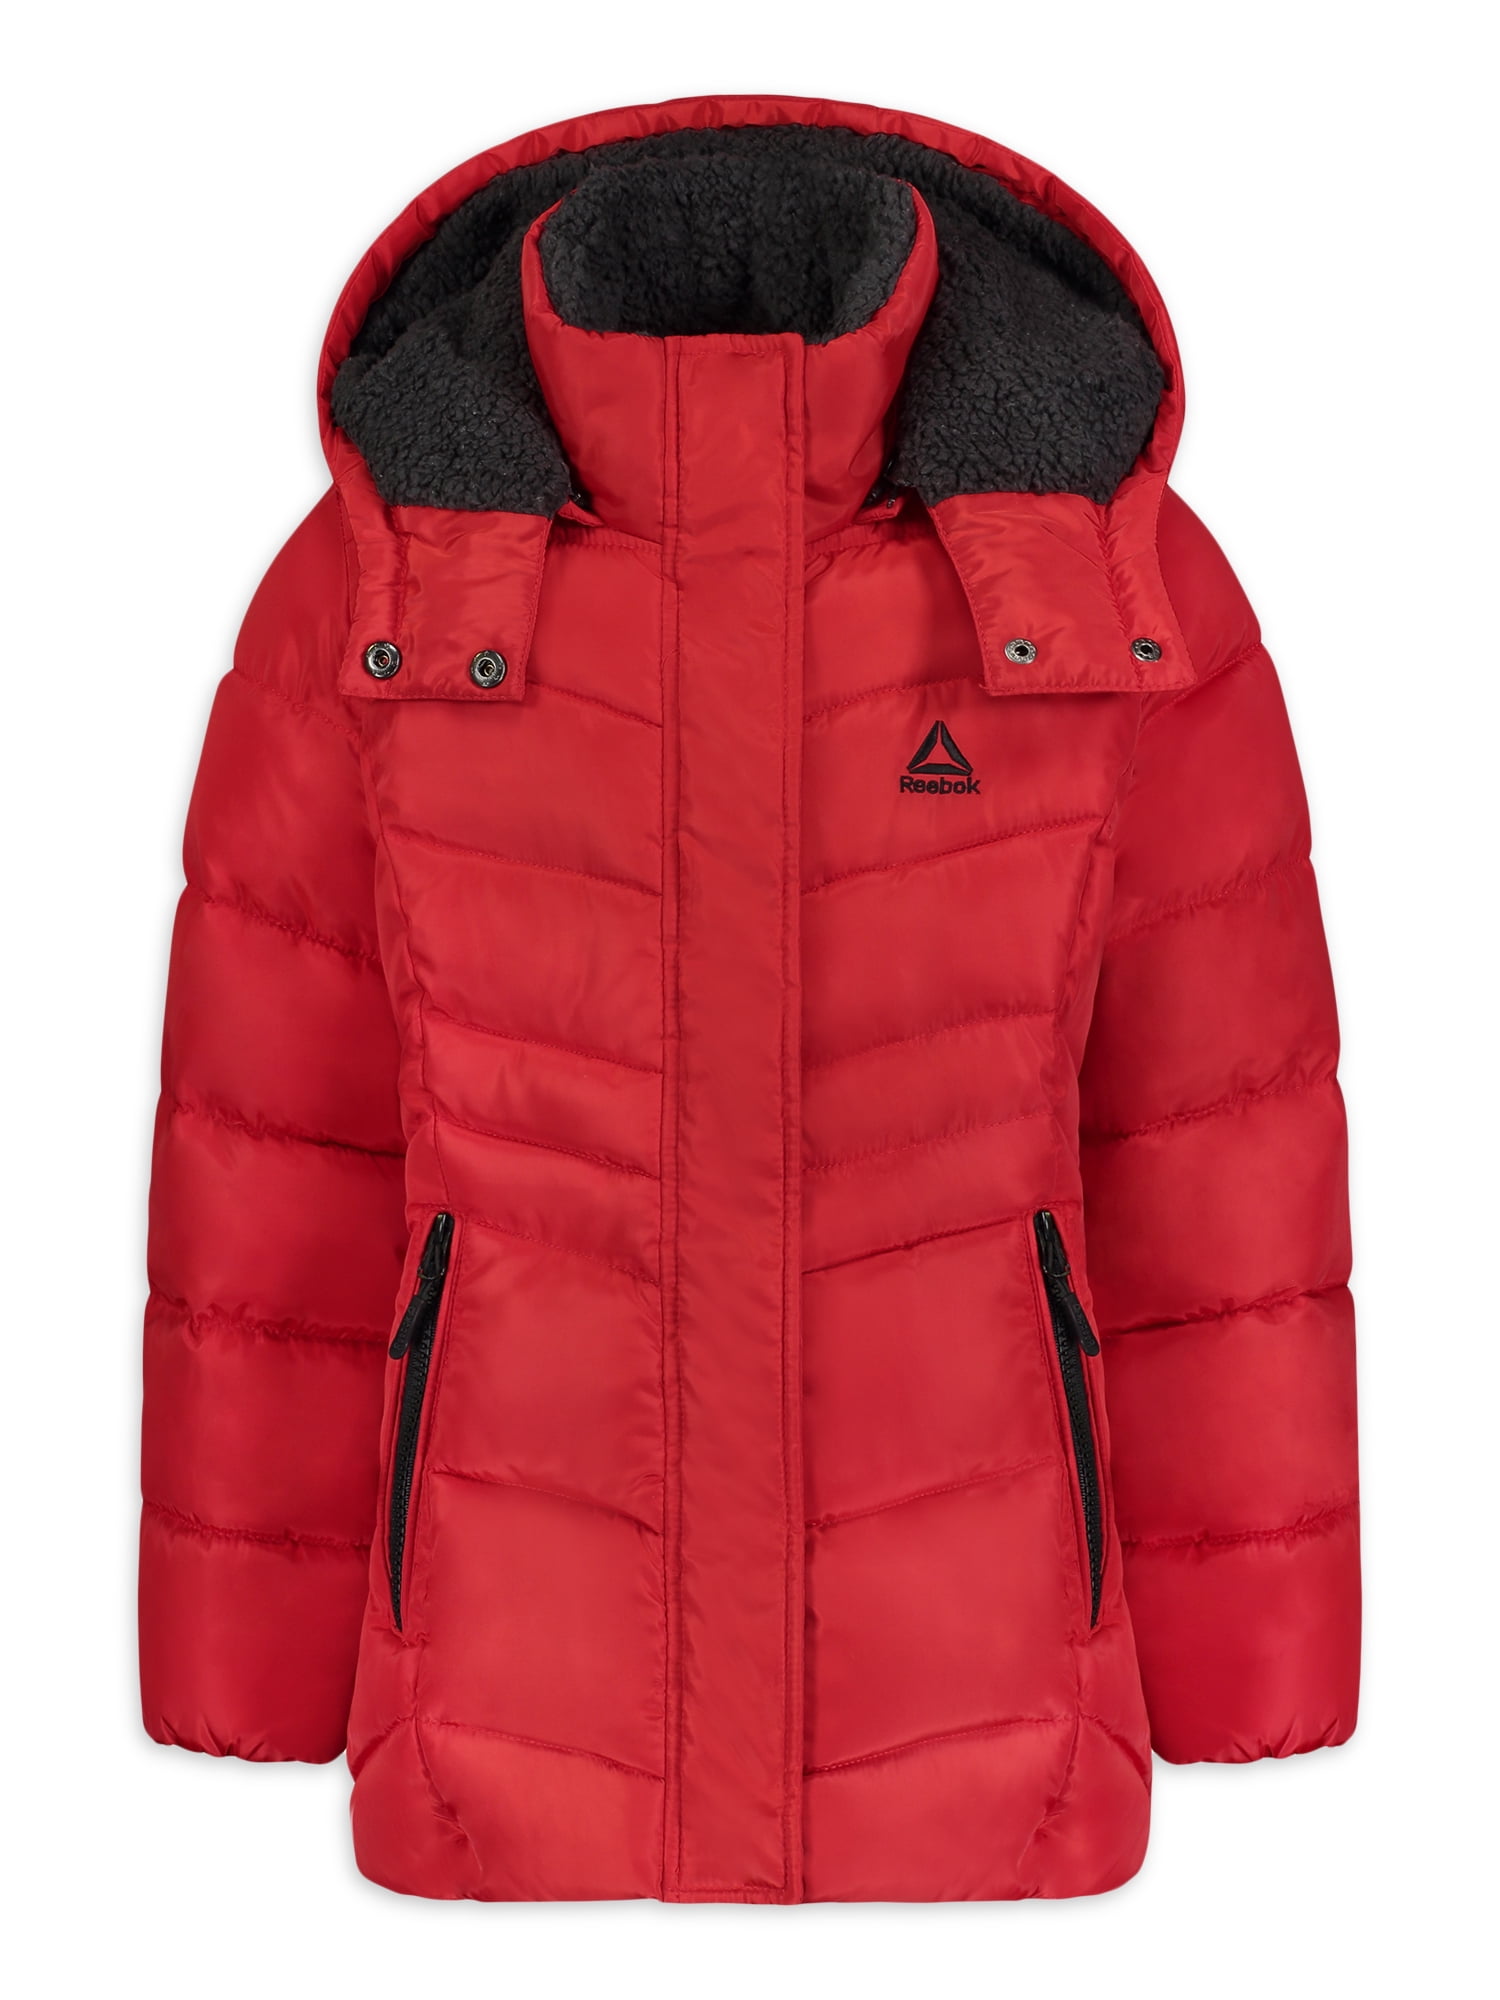 Reebok girls Active Outerwear Jacket More Styles Available